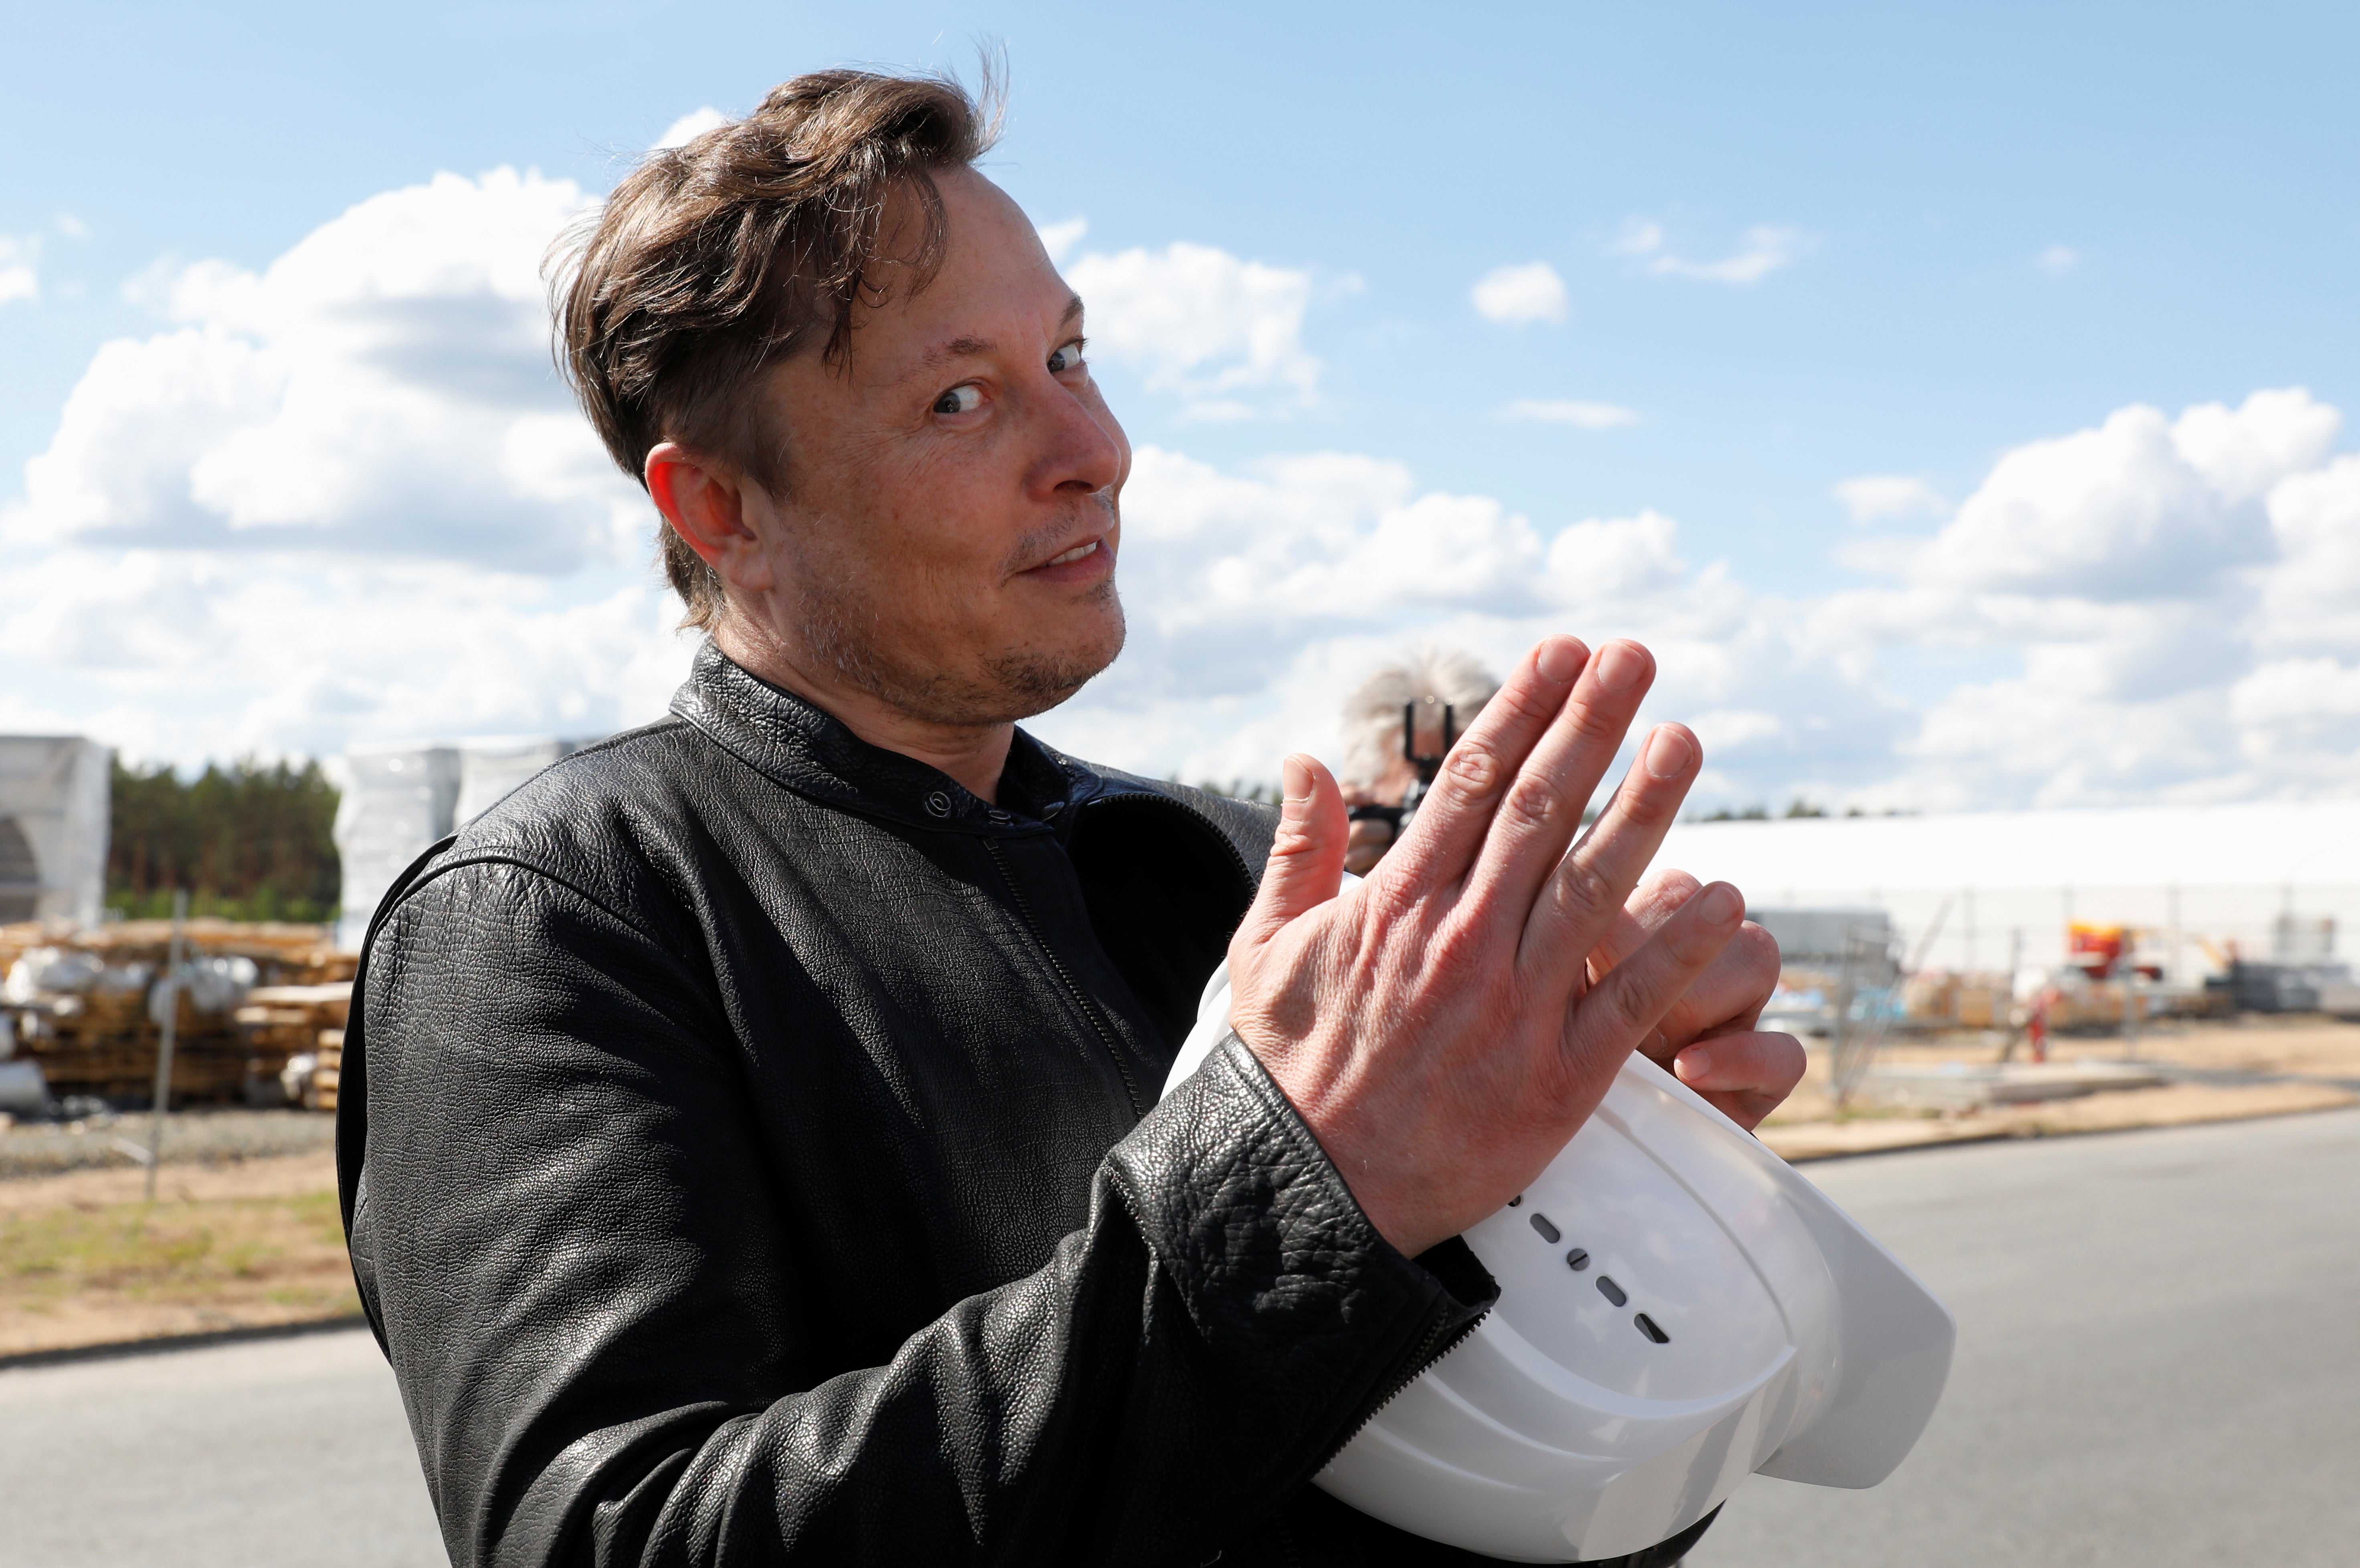 SpaceX founder and Tesla CEO Elon Musk visits the construction site of Tesla’s gigafactory in Gruenheide, near Berlin